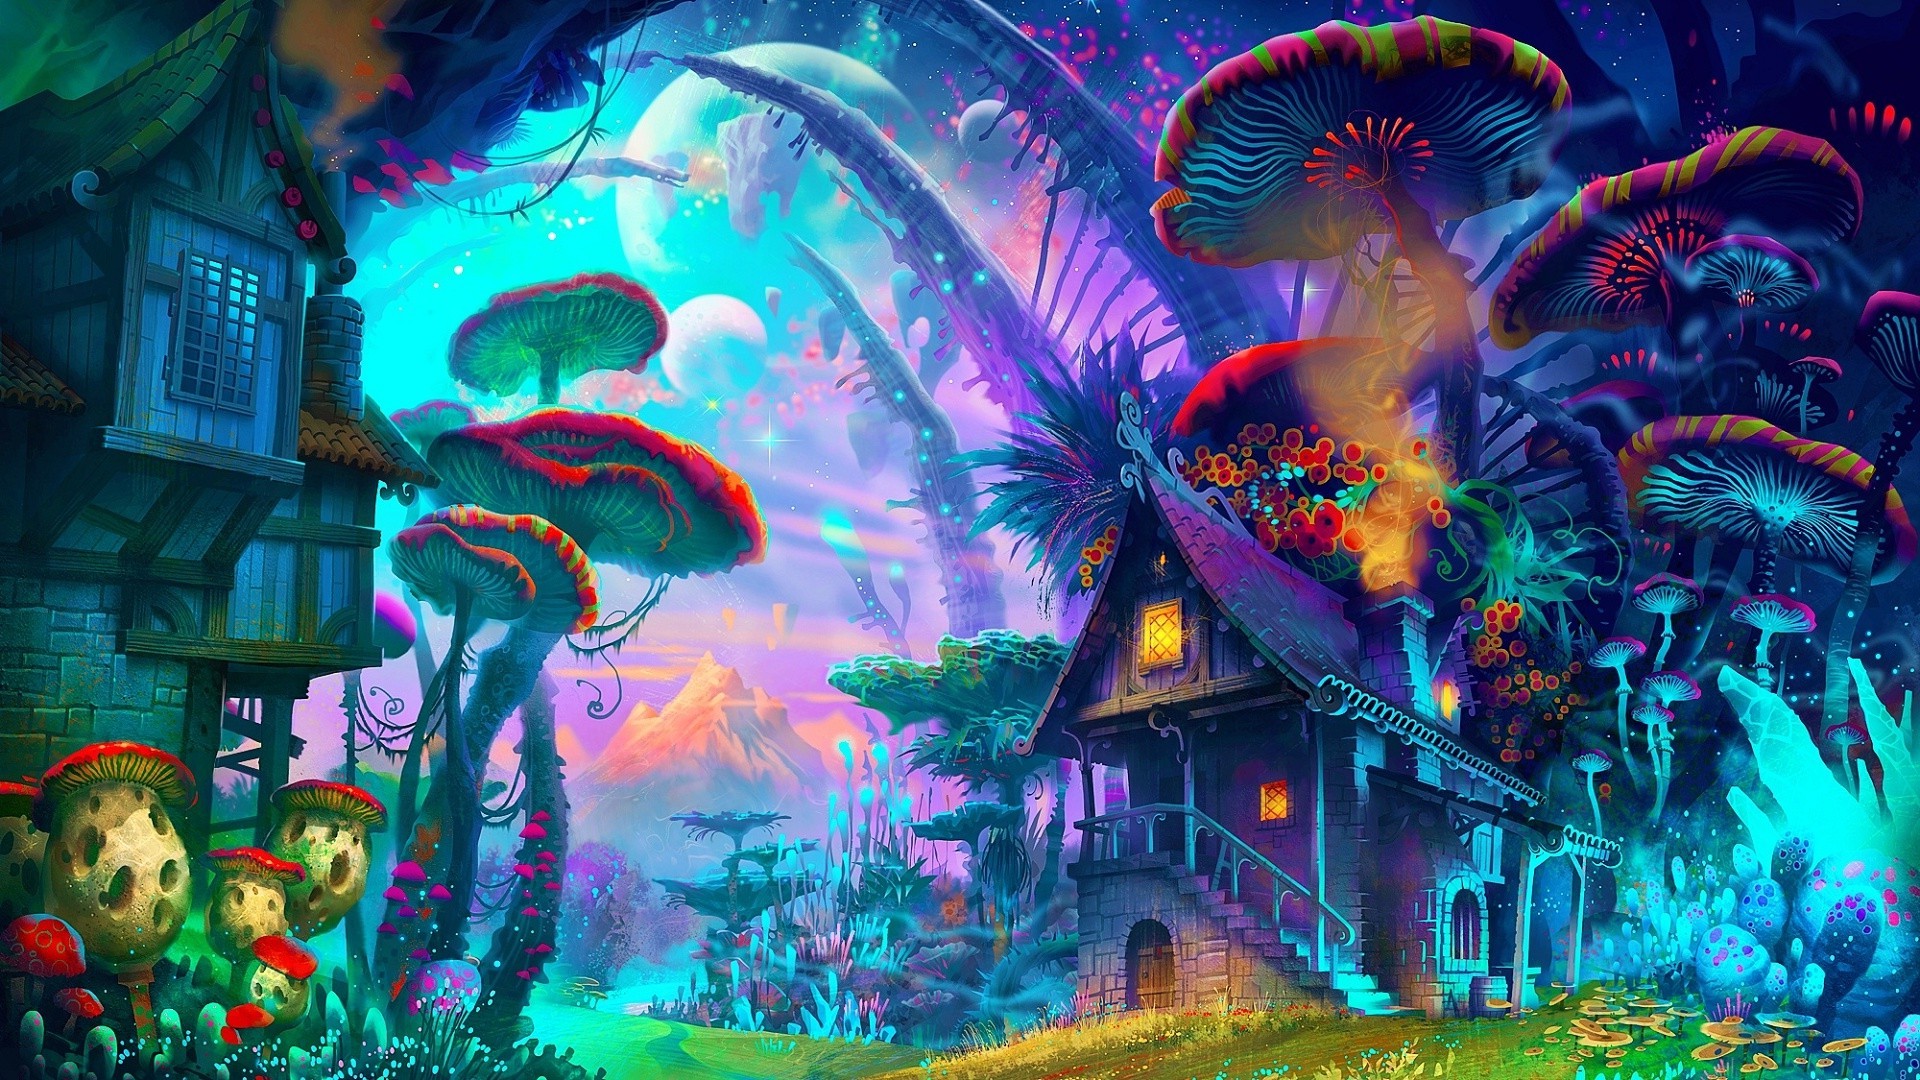 1920x1080 fantasy art drawing nature psychedelic colorful house mushroom planet plants mountain wallpaper JPG 713 kB Gallery HD Wallpaper